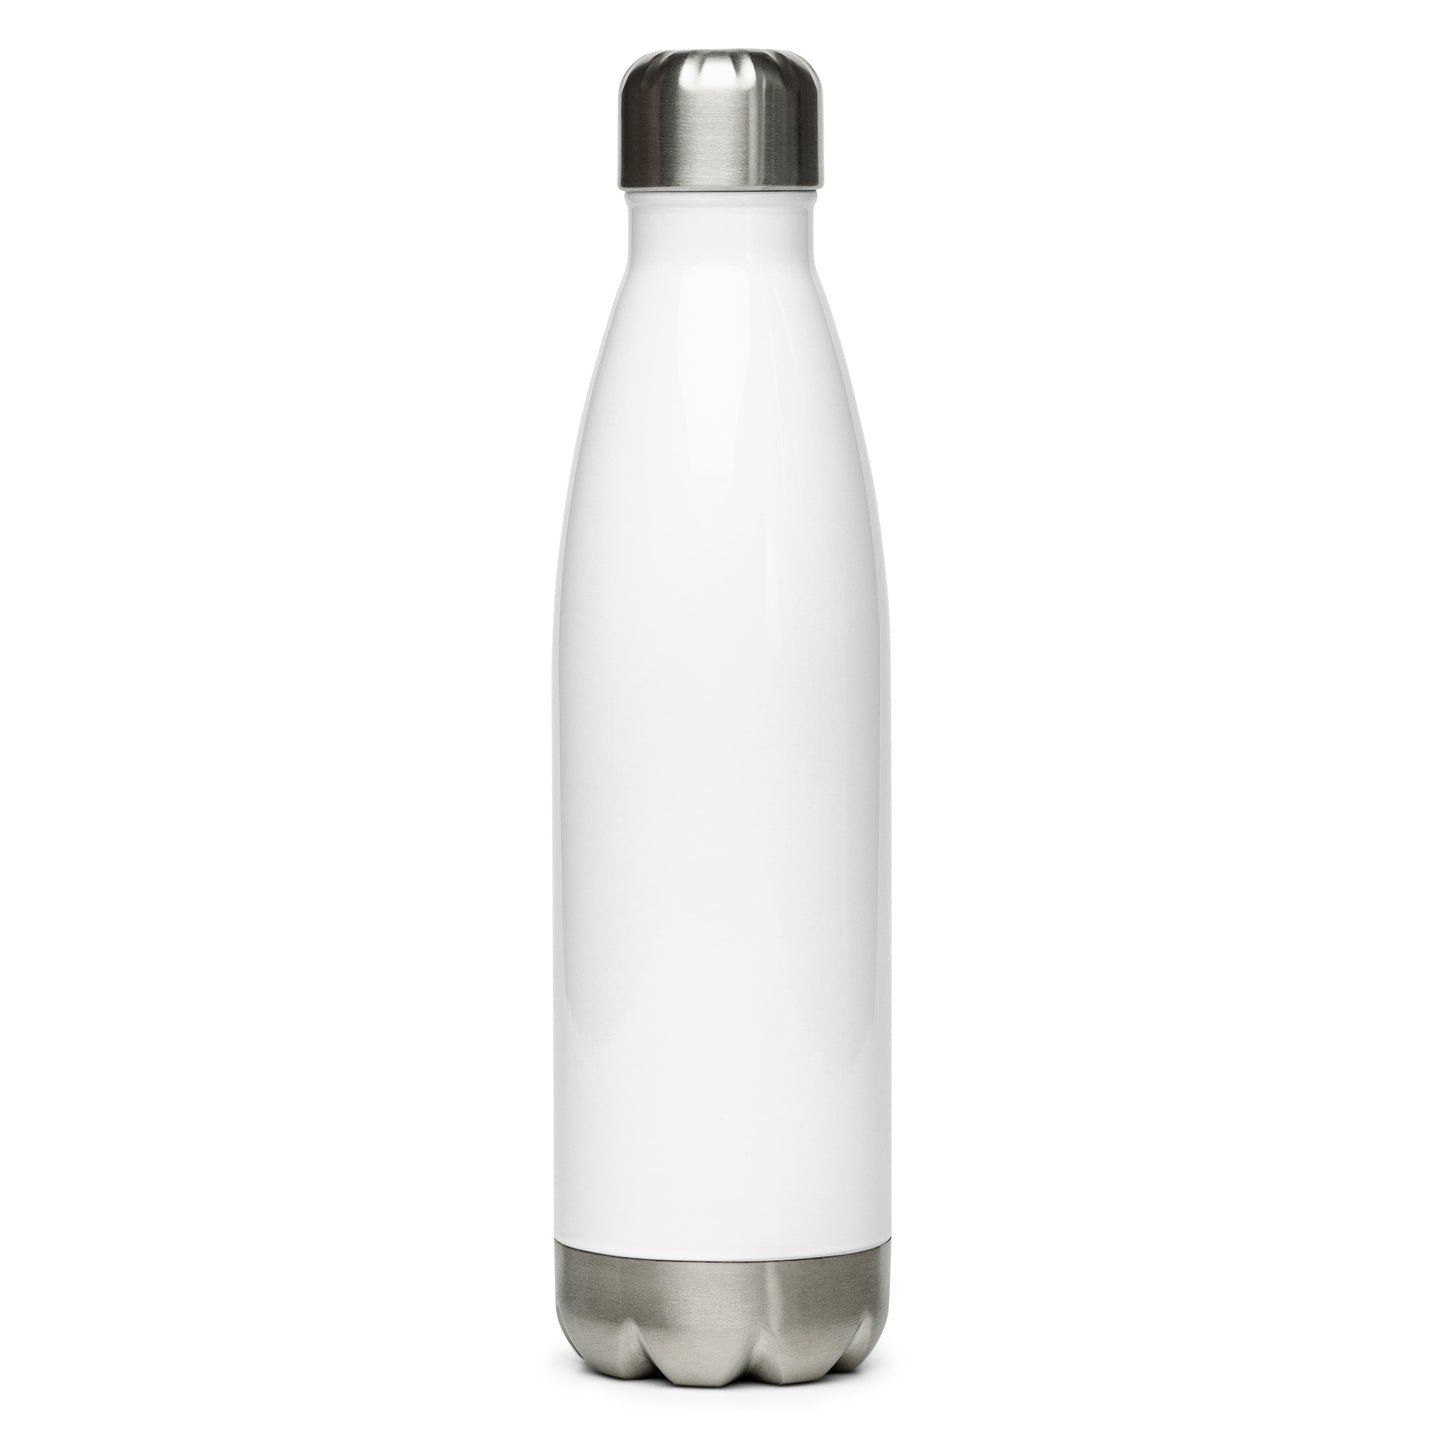 Limited Edition Skully Stainless Steel Water Bottle